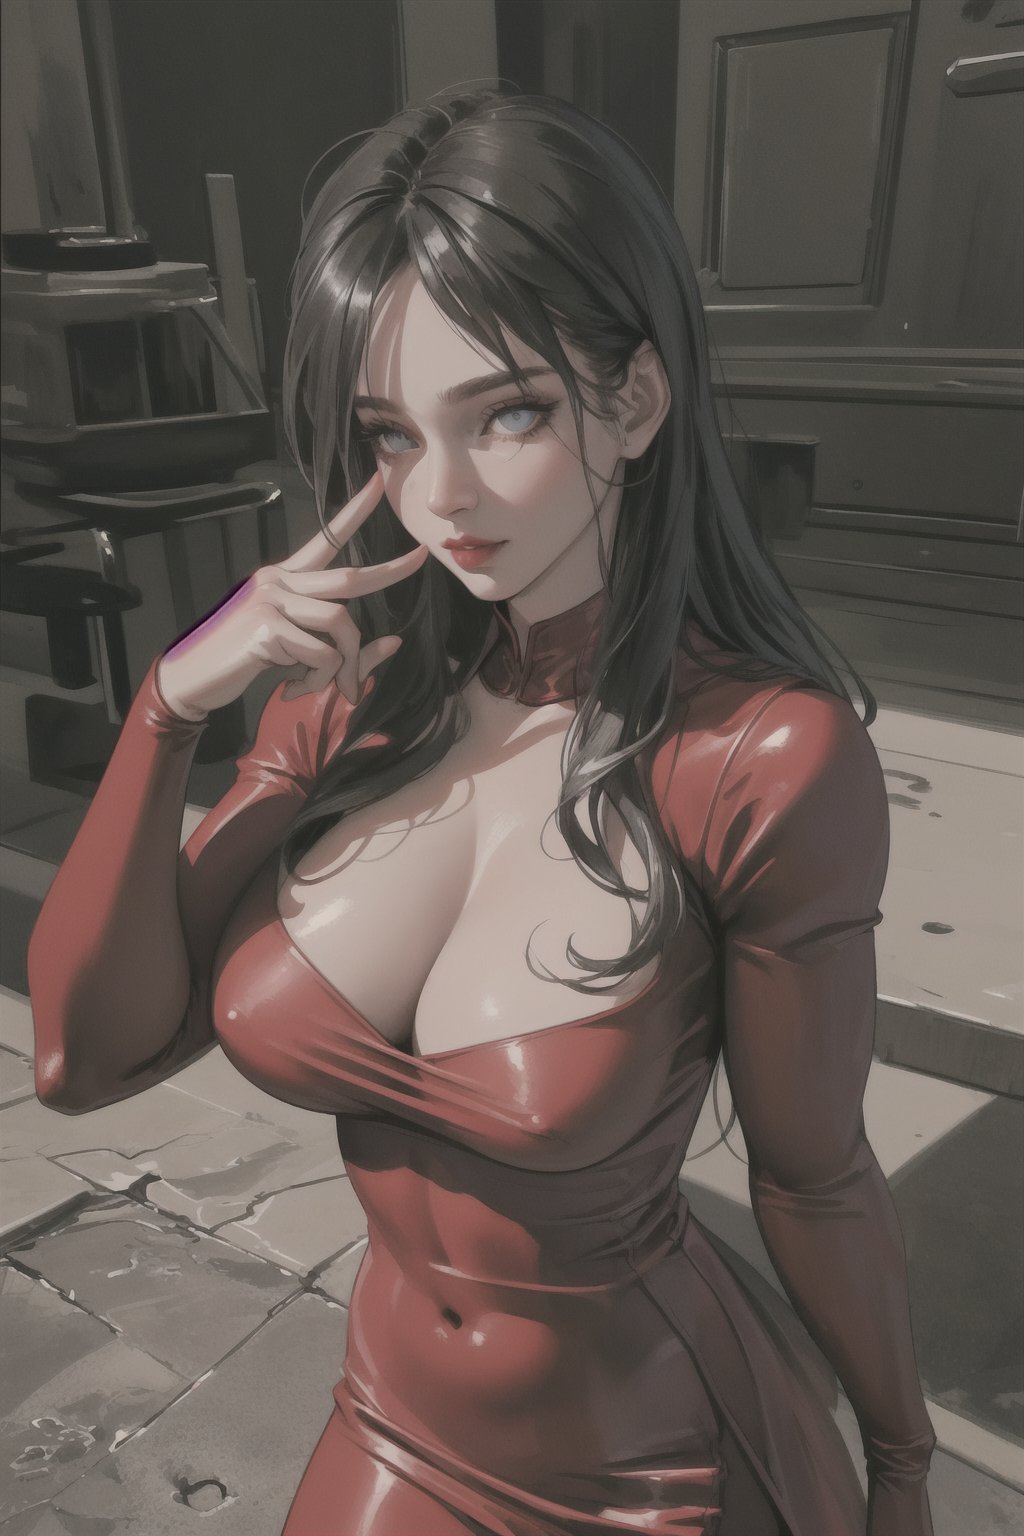 Best quality,fullbodyshot,cleavage , realistic eyes ,detailed eyes, photo realistic image 
 detailed face , gothic,noir,red dress muscular the same wpman, dress , body, realistic hands 4 fingers and a thumb on each hand, shiny hair, breasts firm, muscles strong and firm, dress tight
